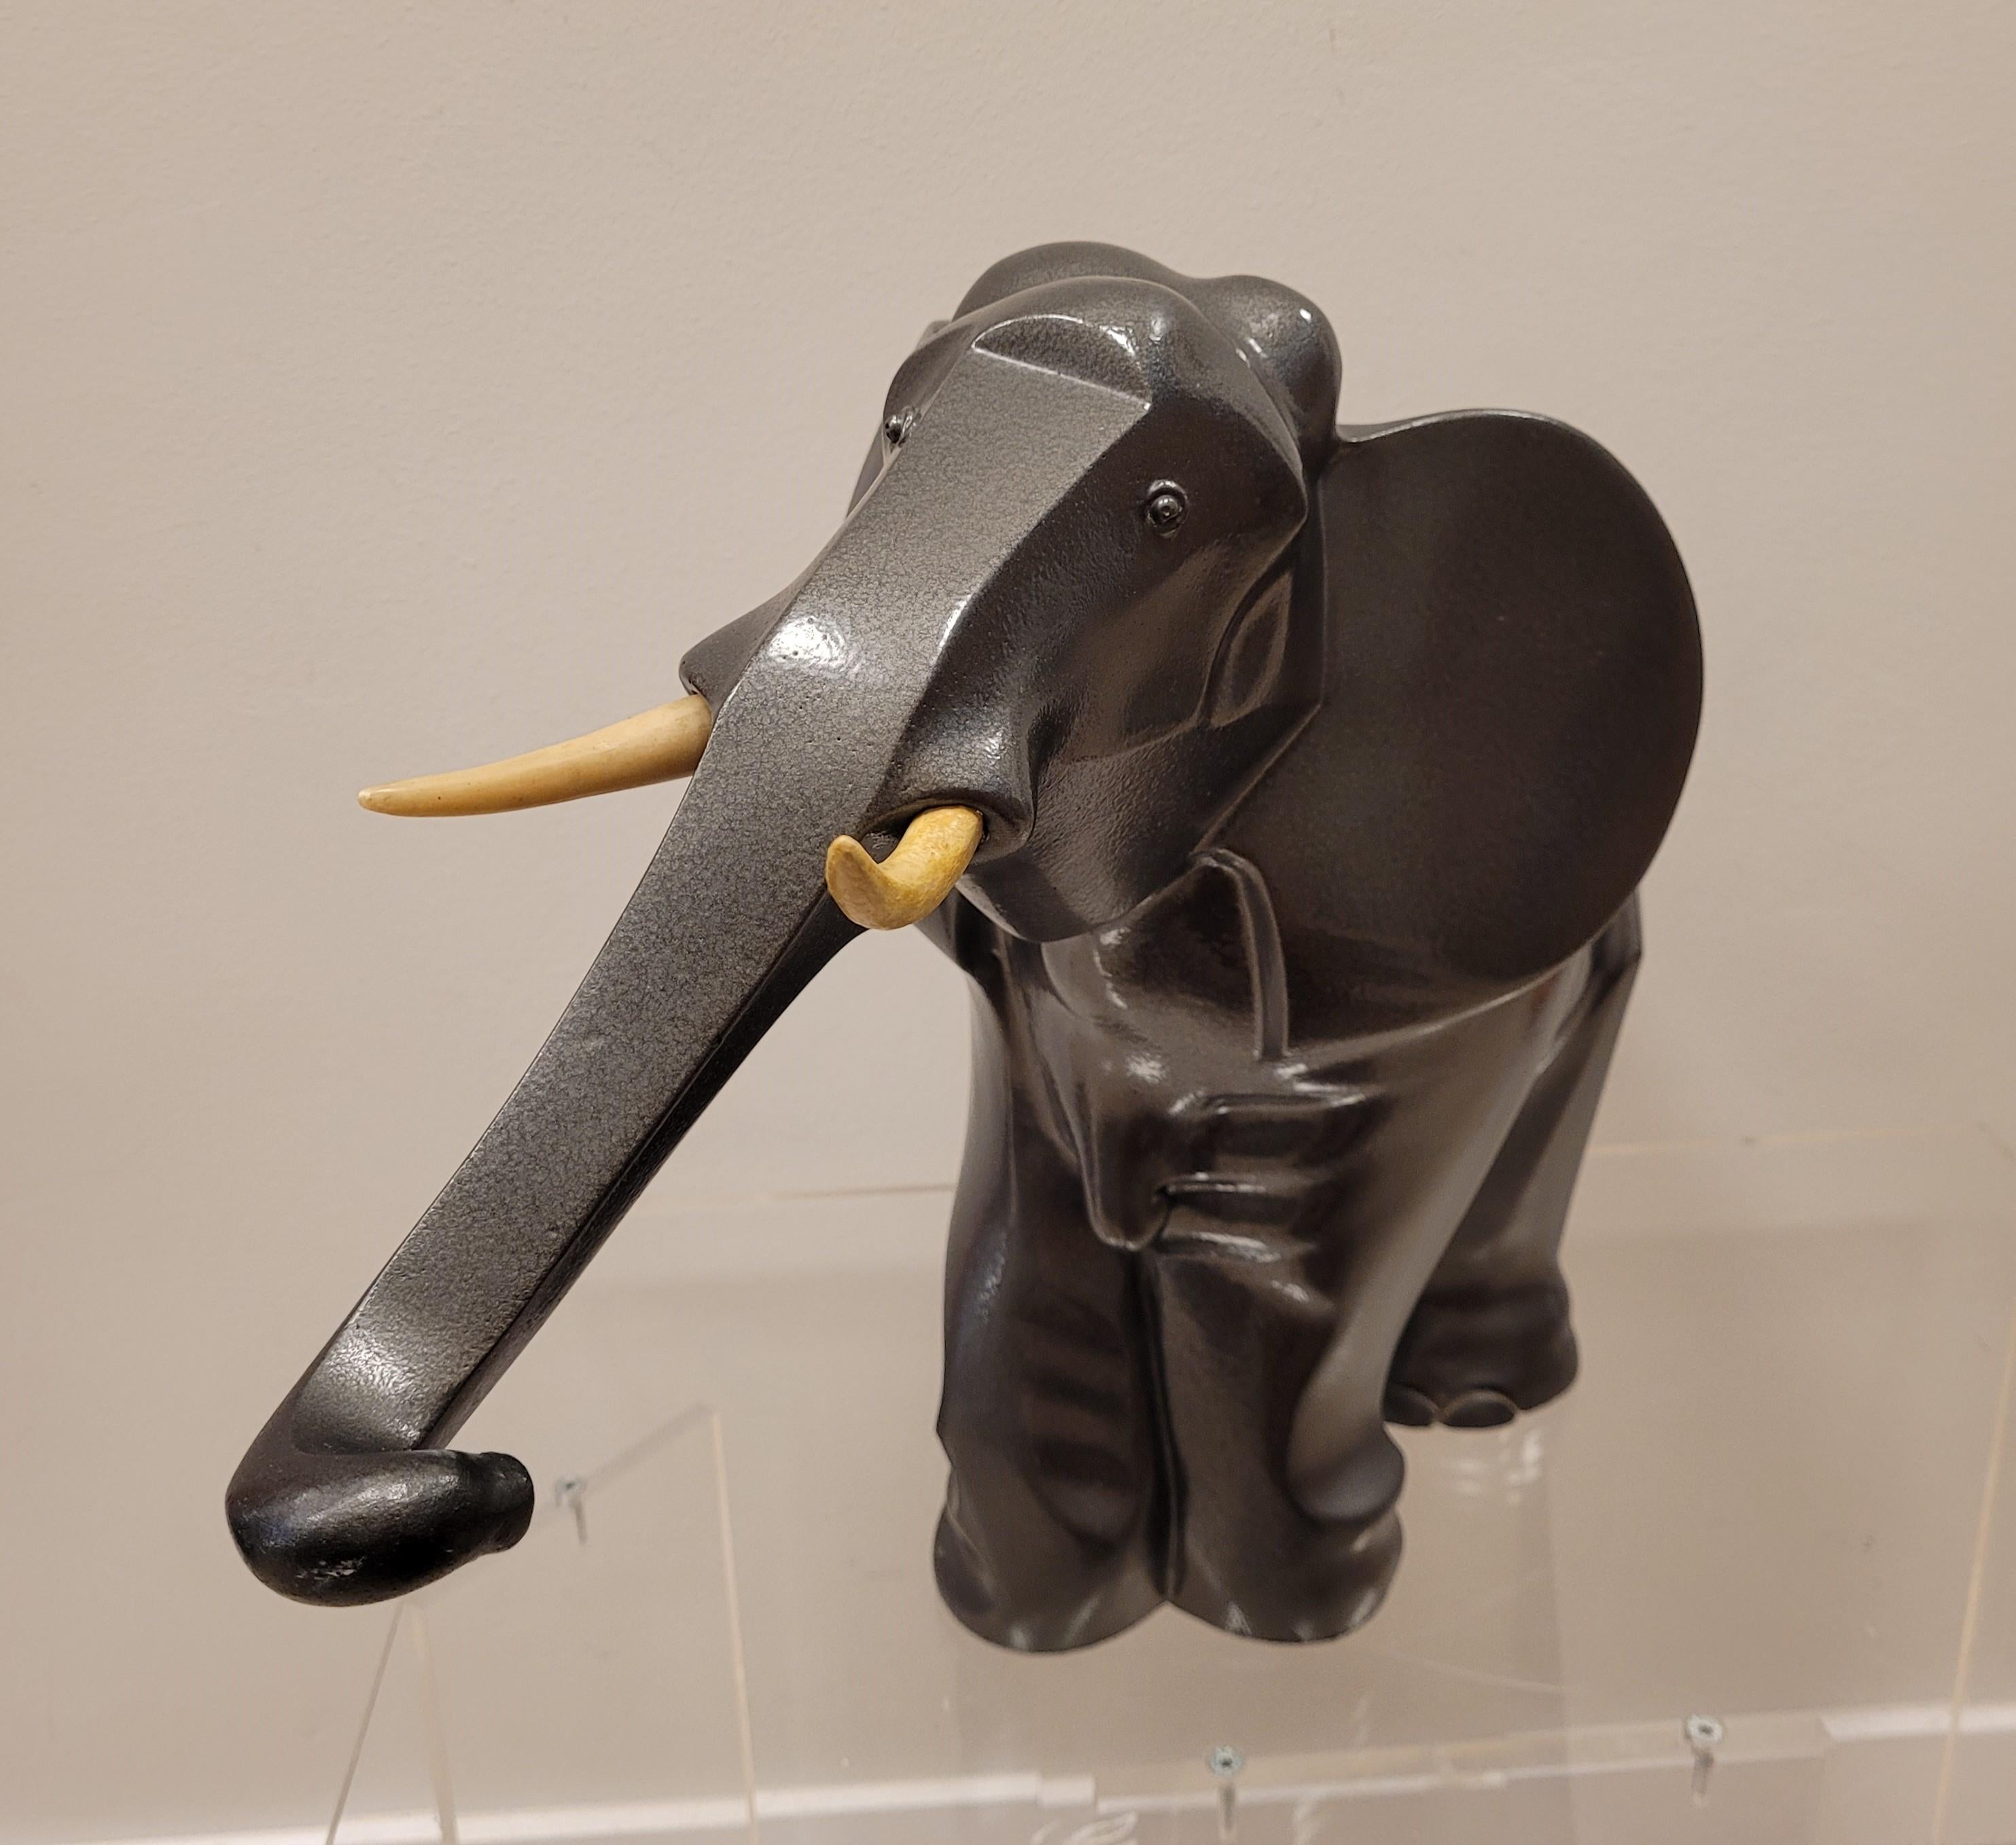 Art Deco French Elephant Sculpture, Babbitt Material In Good Condition For Sale In Valladolid, ES